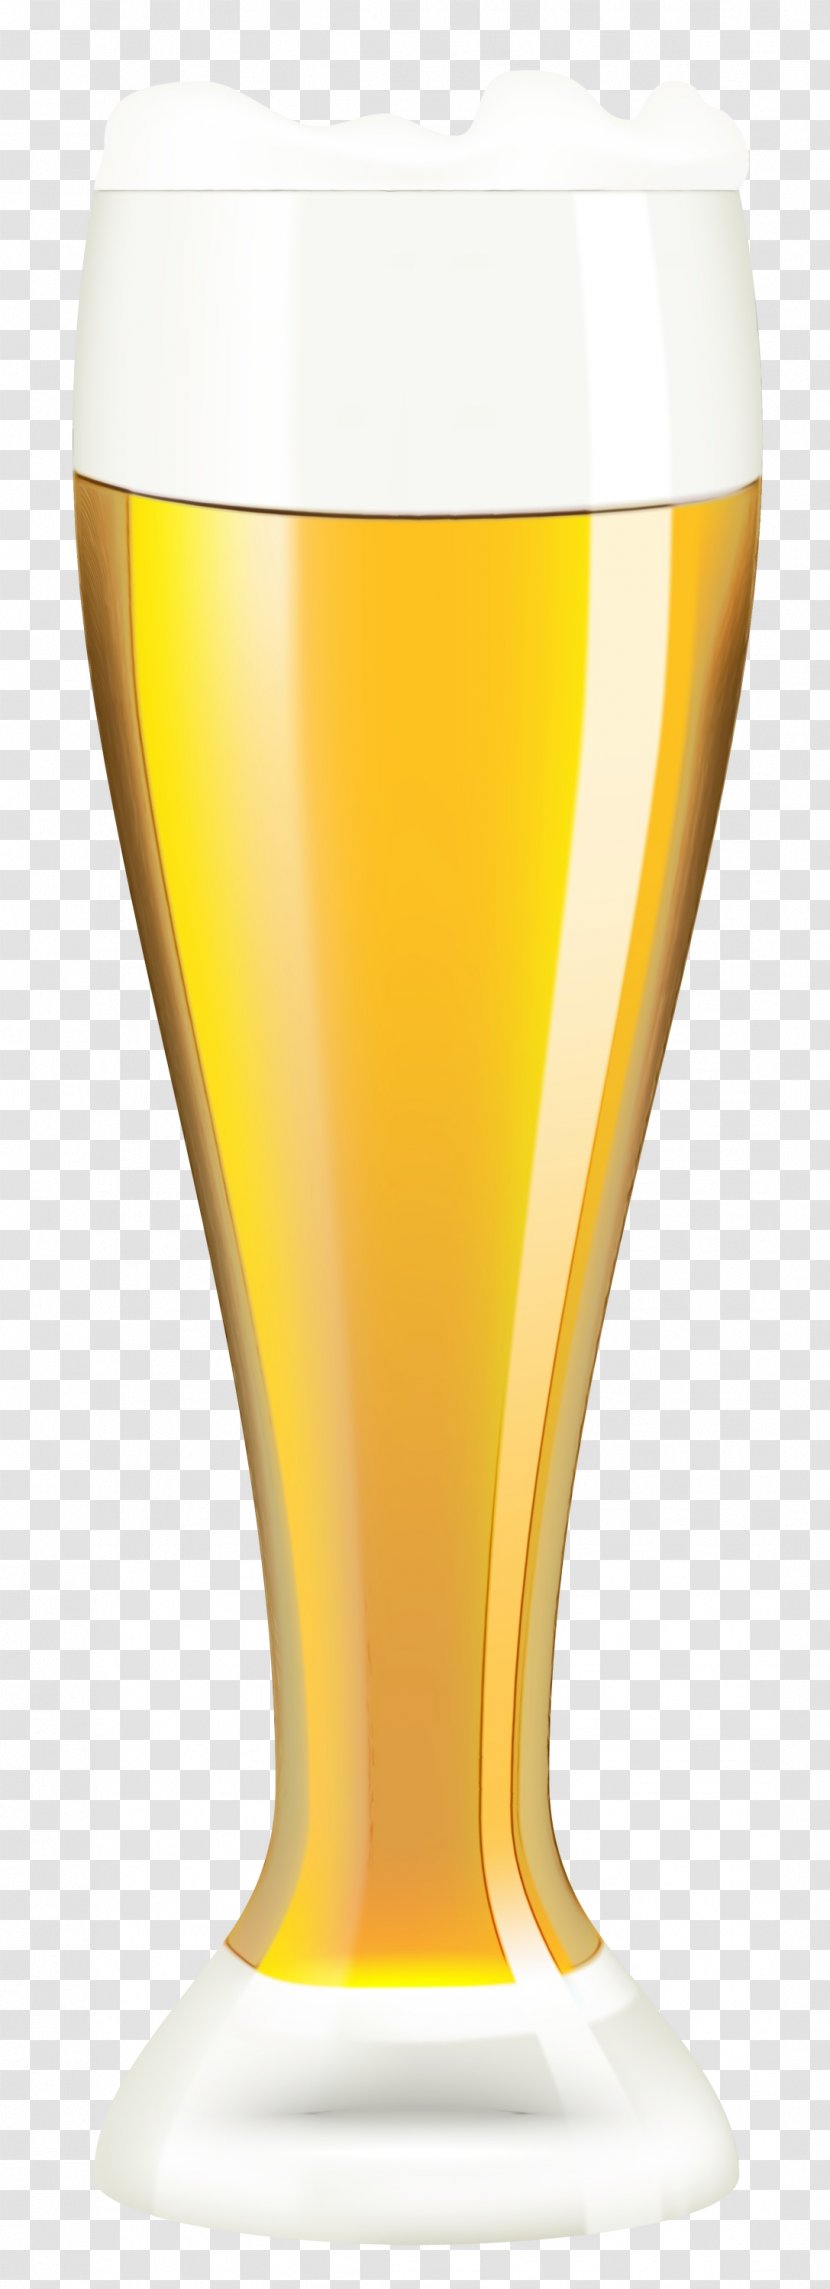 Yellow Beer Glass Champagne Cocktail Drinkware Stemware - Wheat - Sparkling Wine Transparent PNG